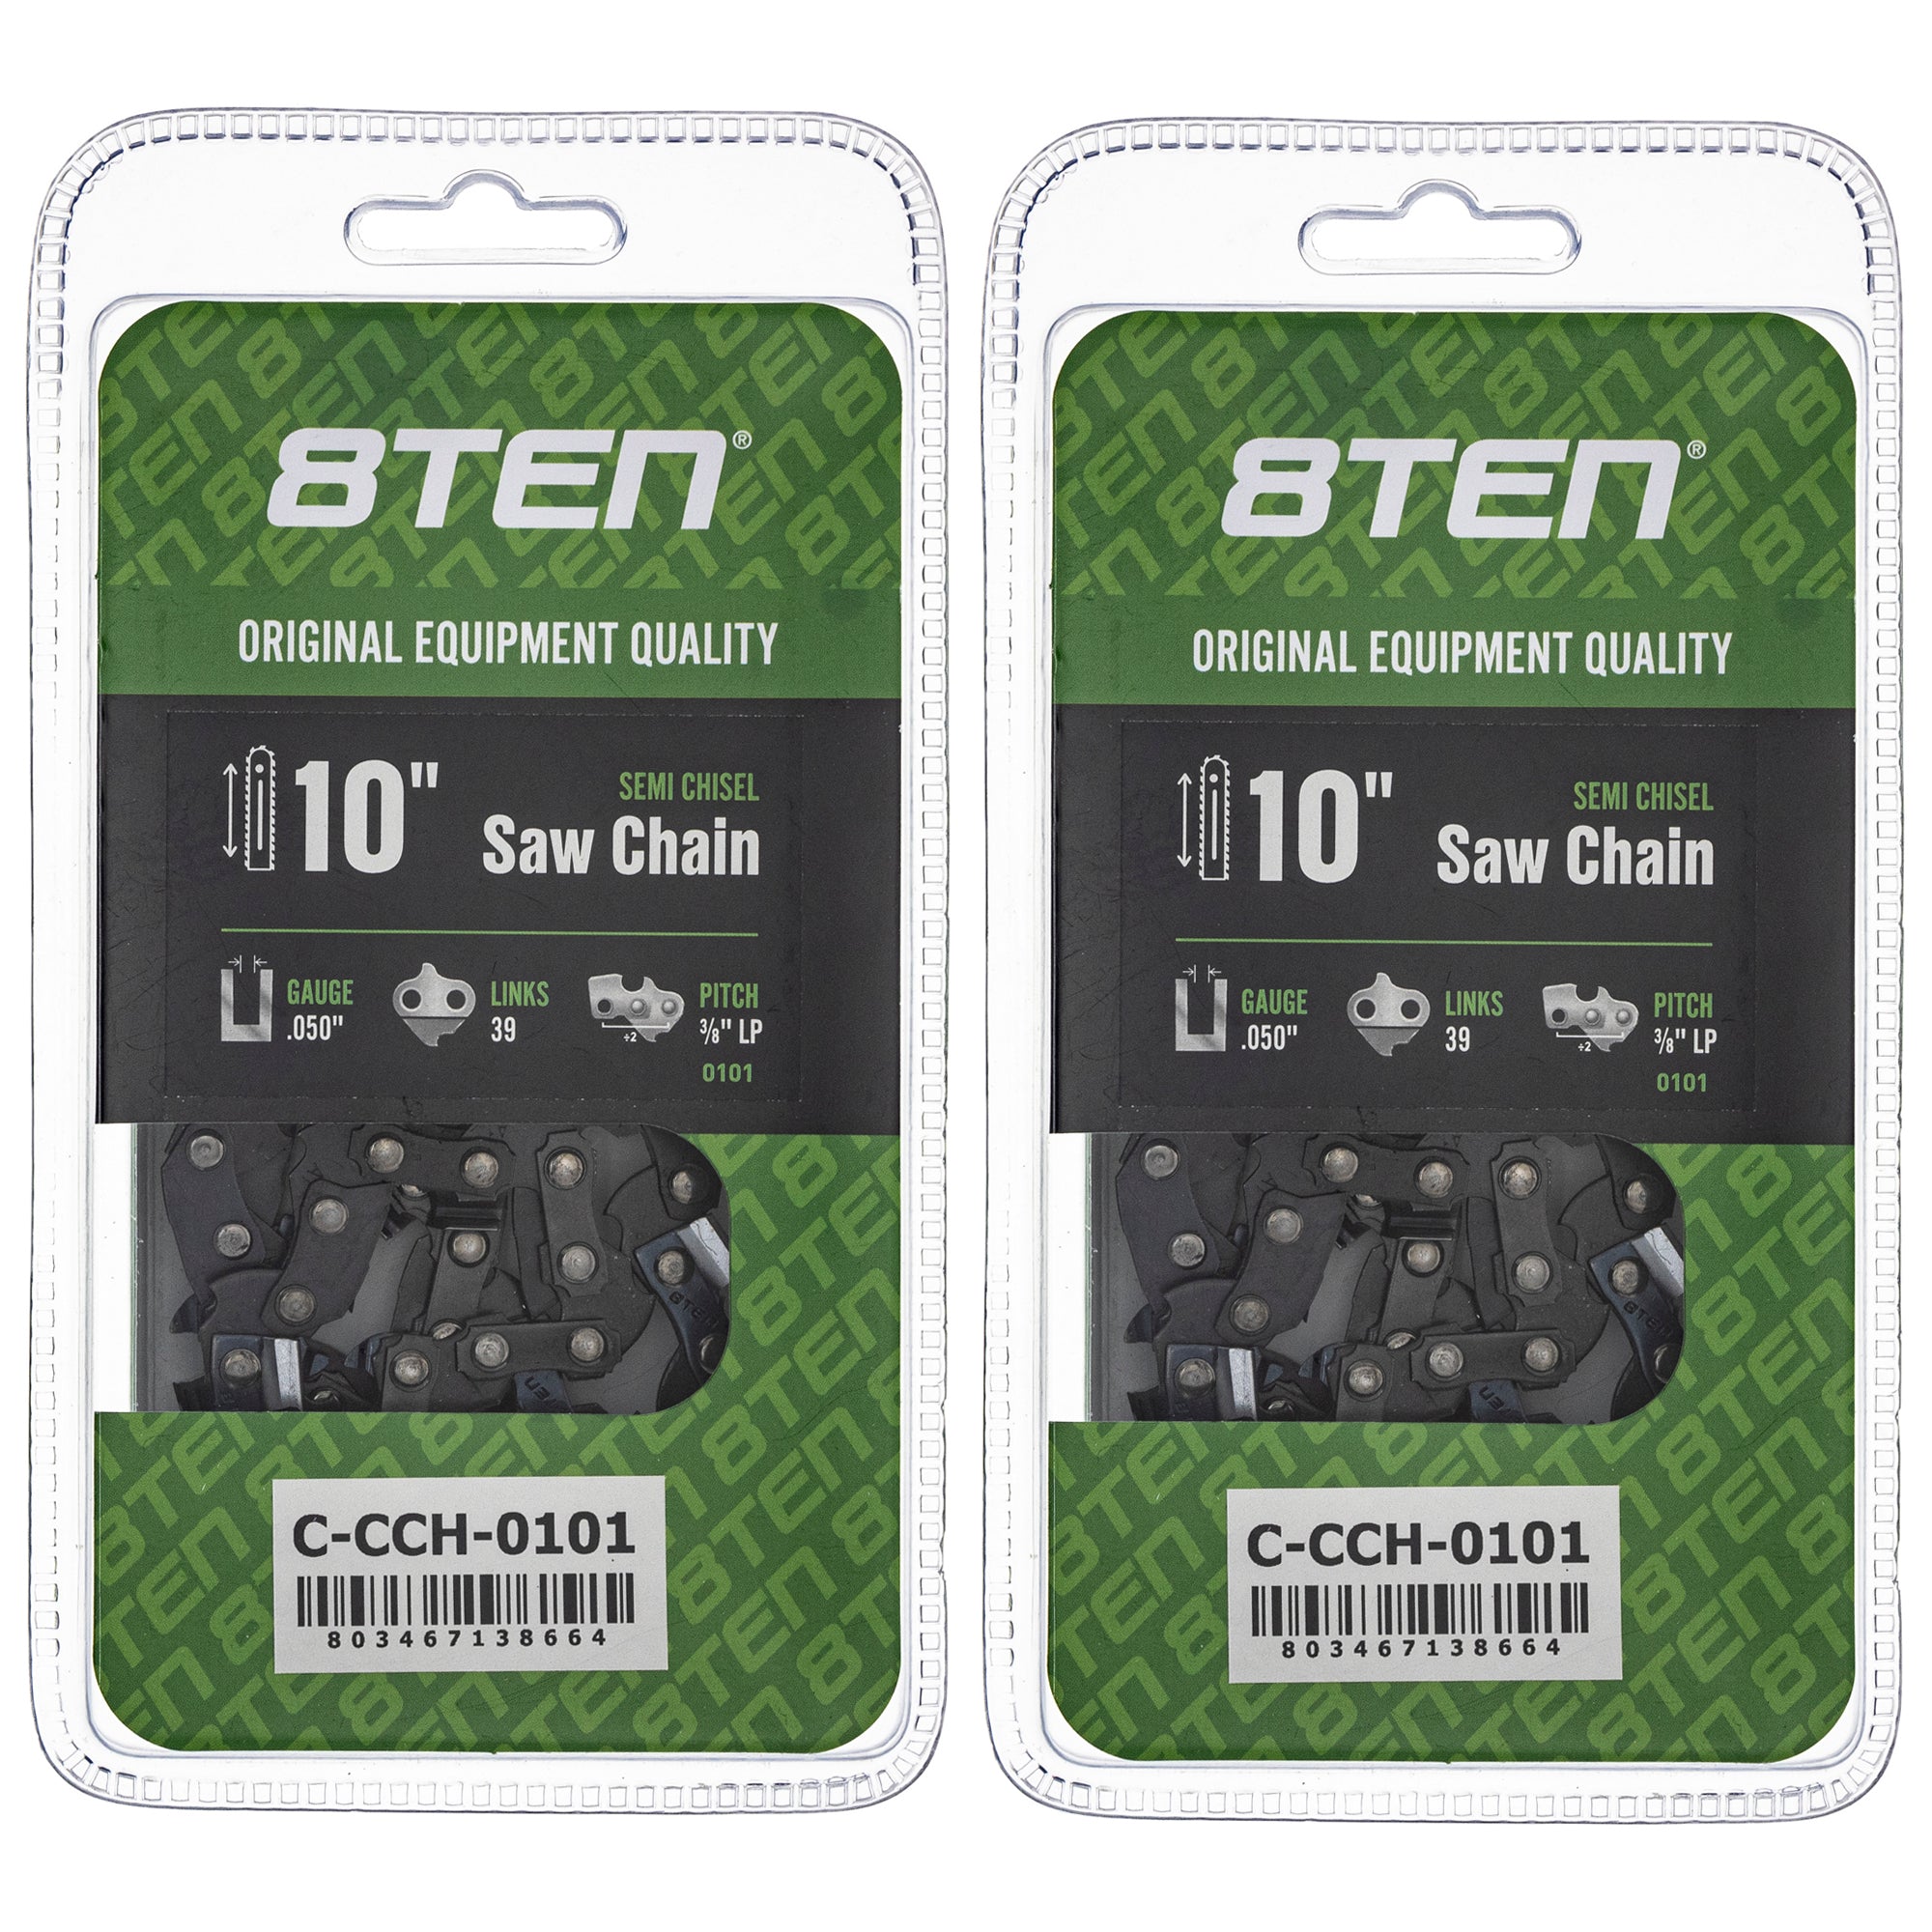 Chainsaw Chain 10 Inch .050 3/8 LP 39DL 2-Pack for zOTHER Oregon Echo Shindaiwa Bear Cat 8TEN 810-CCC2323H